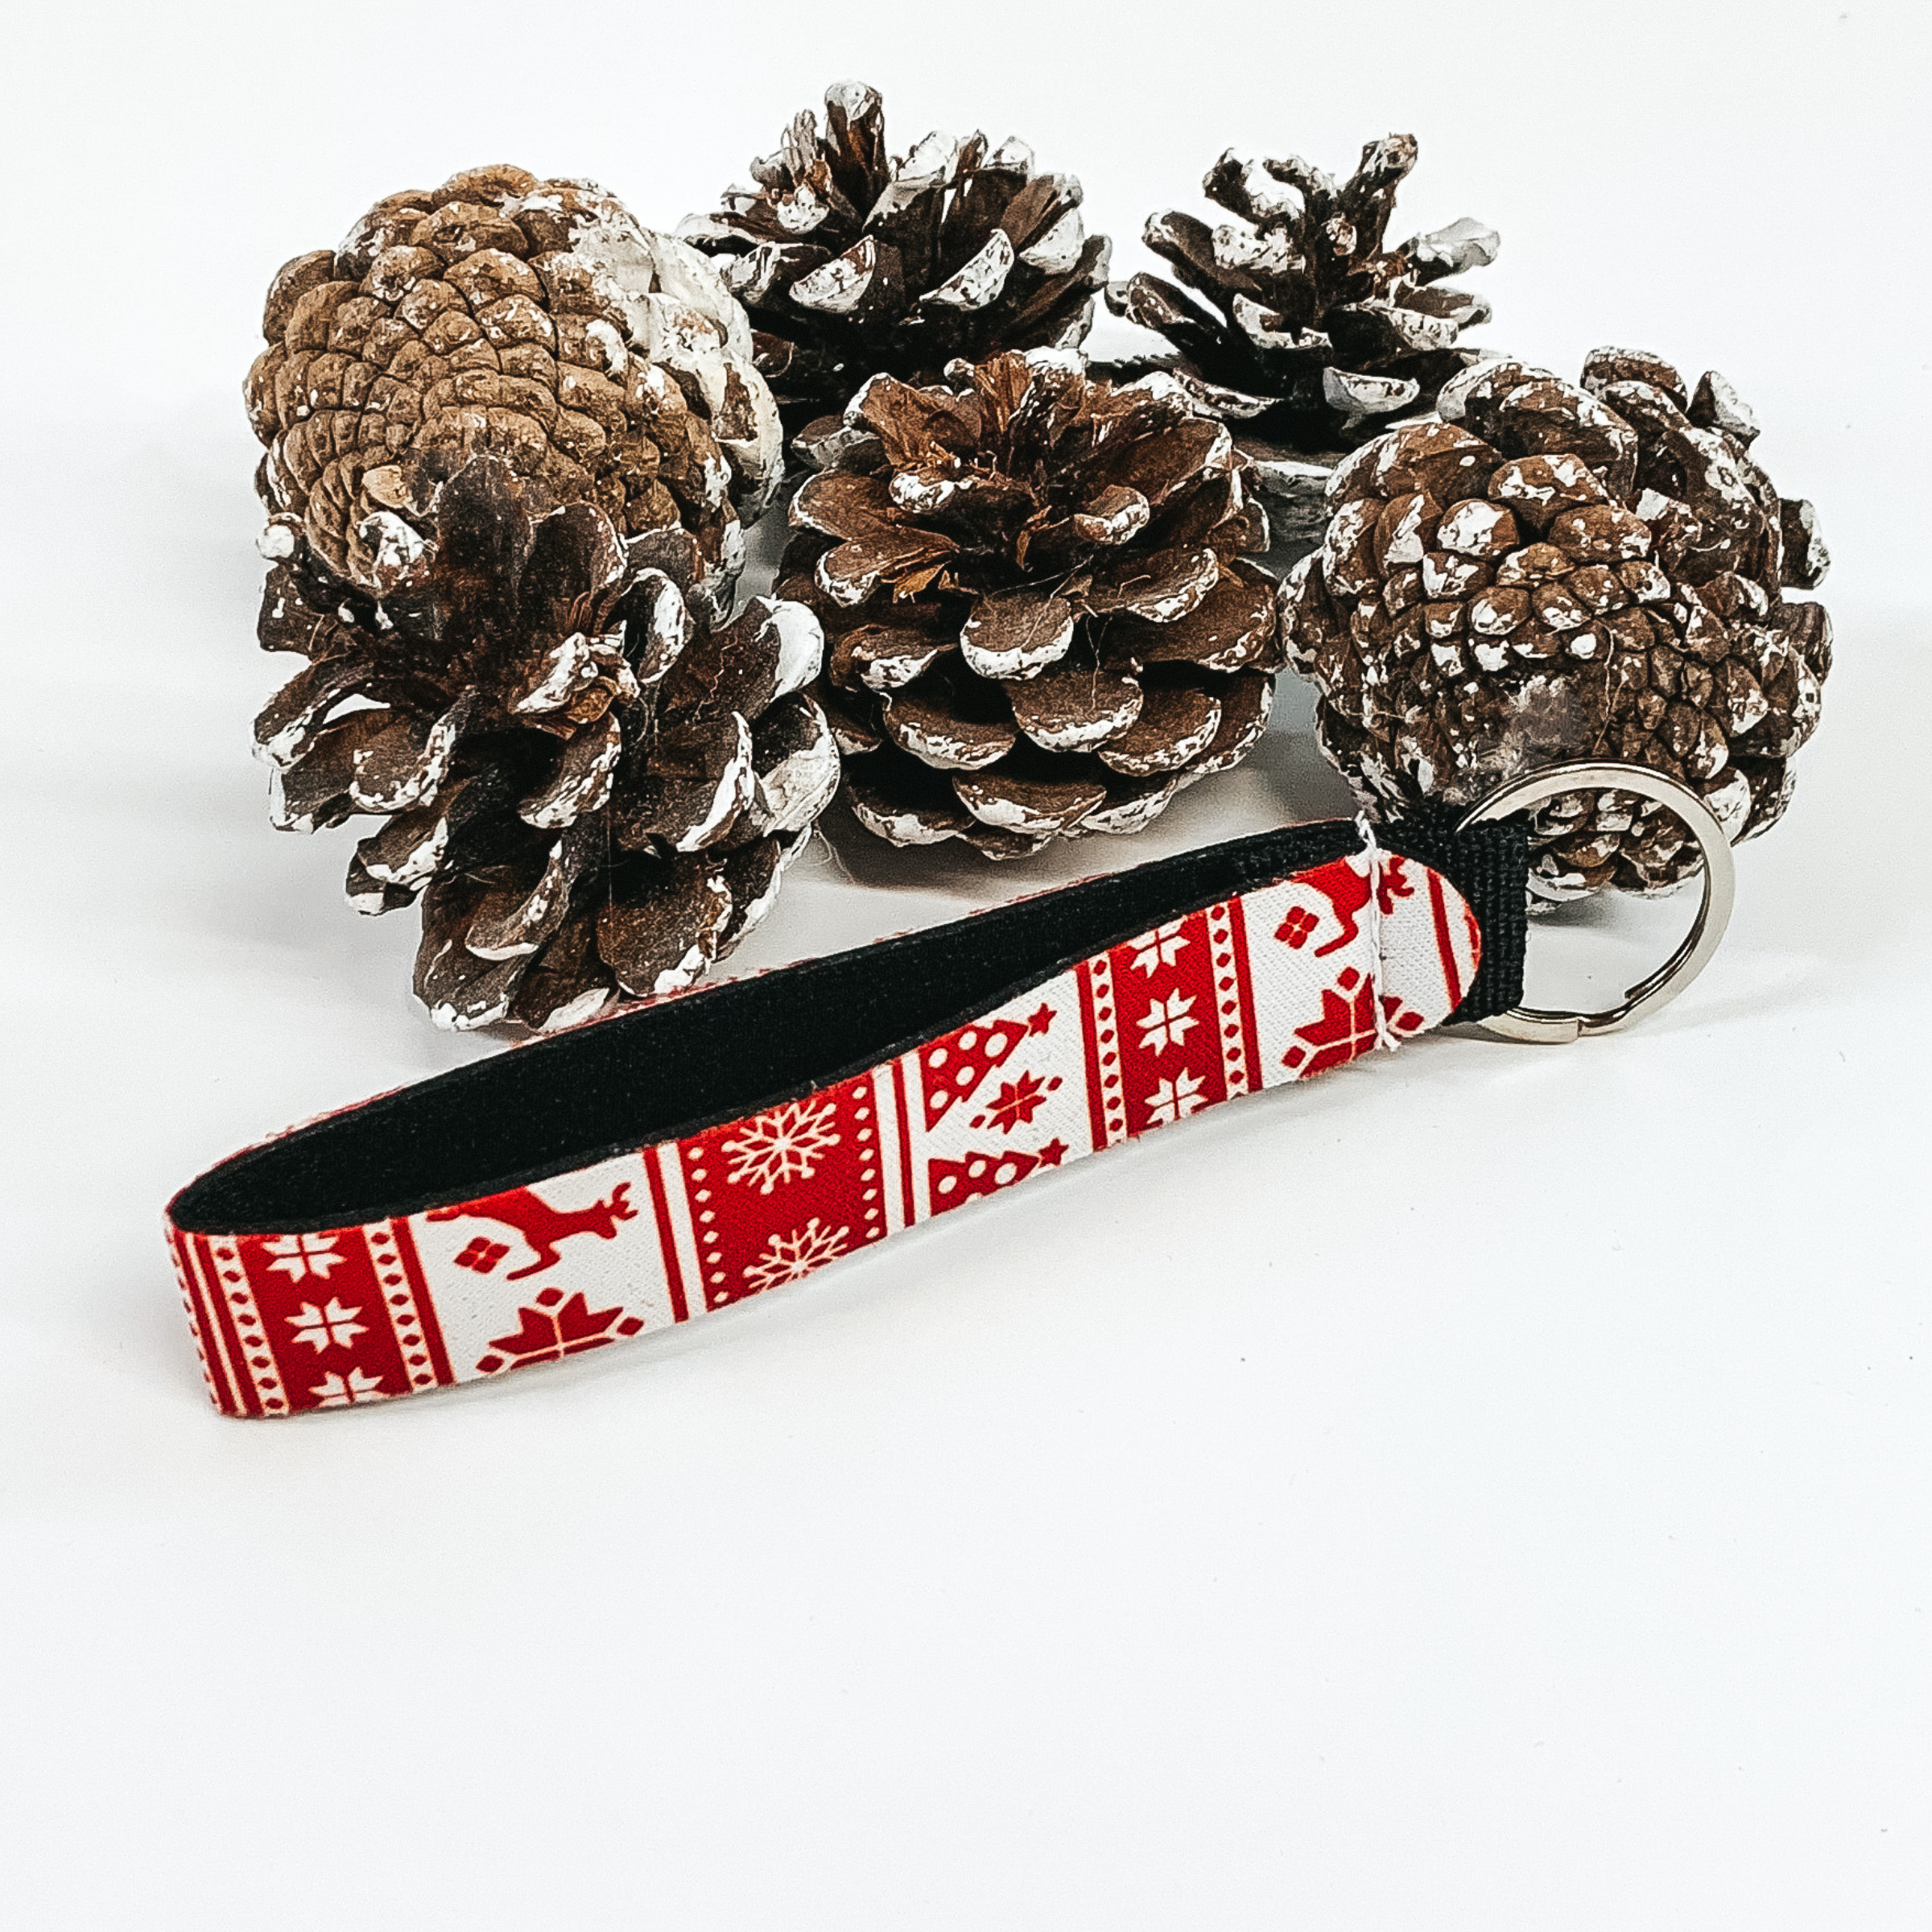 White key chain with red christmas print on a white background with pine cones